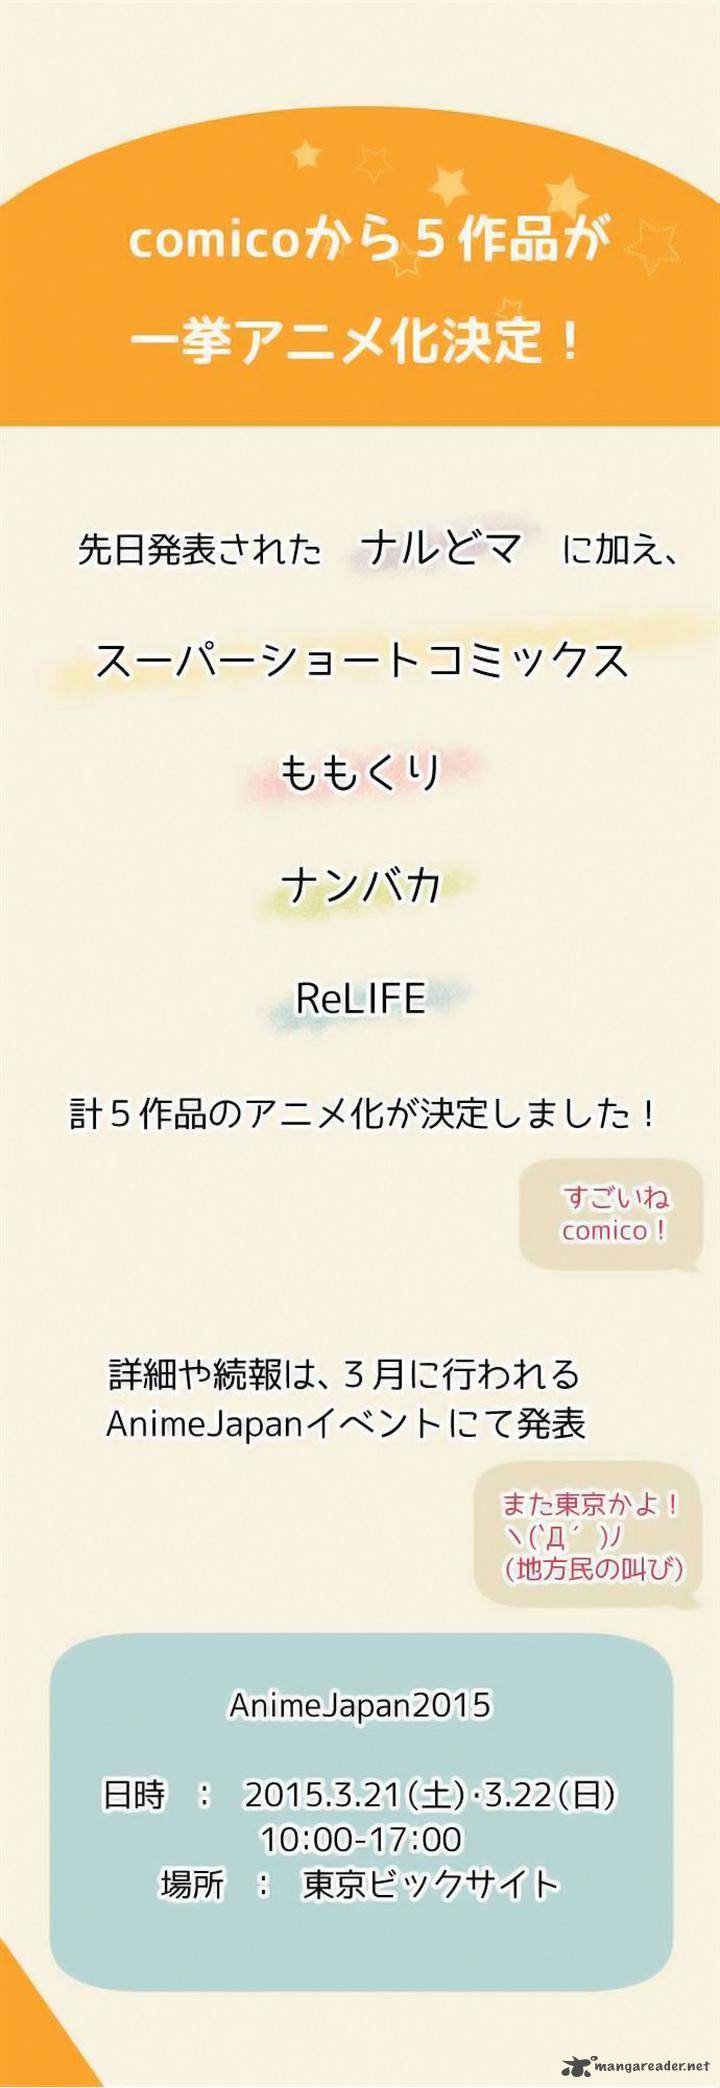 Relife 66 26